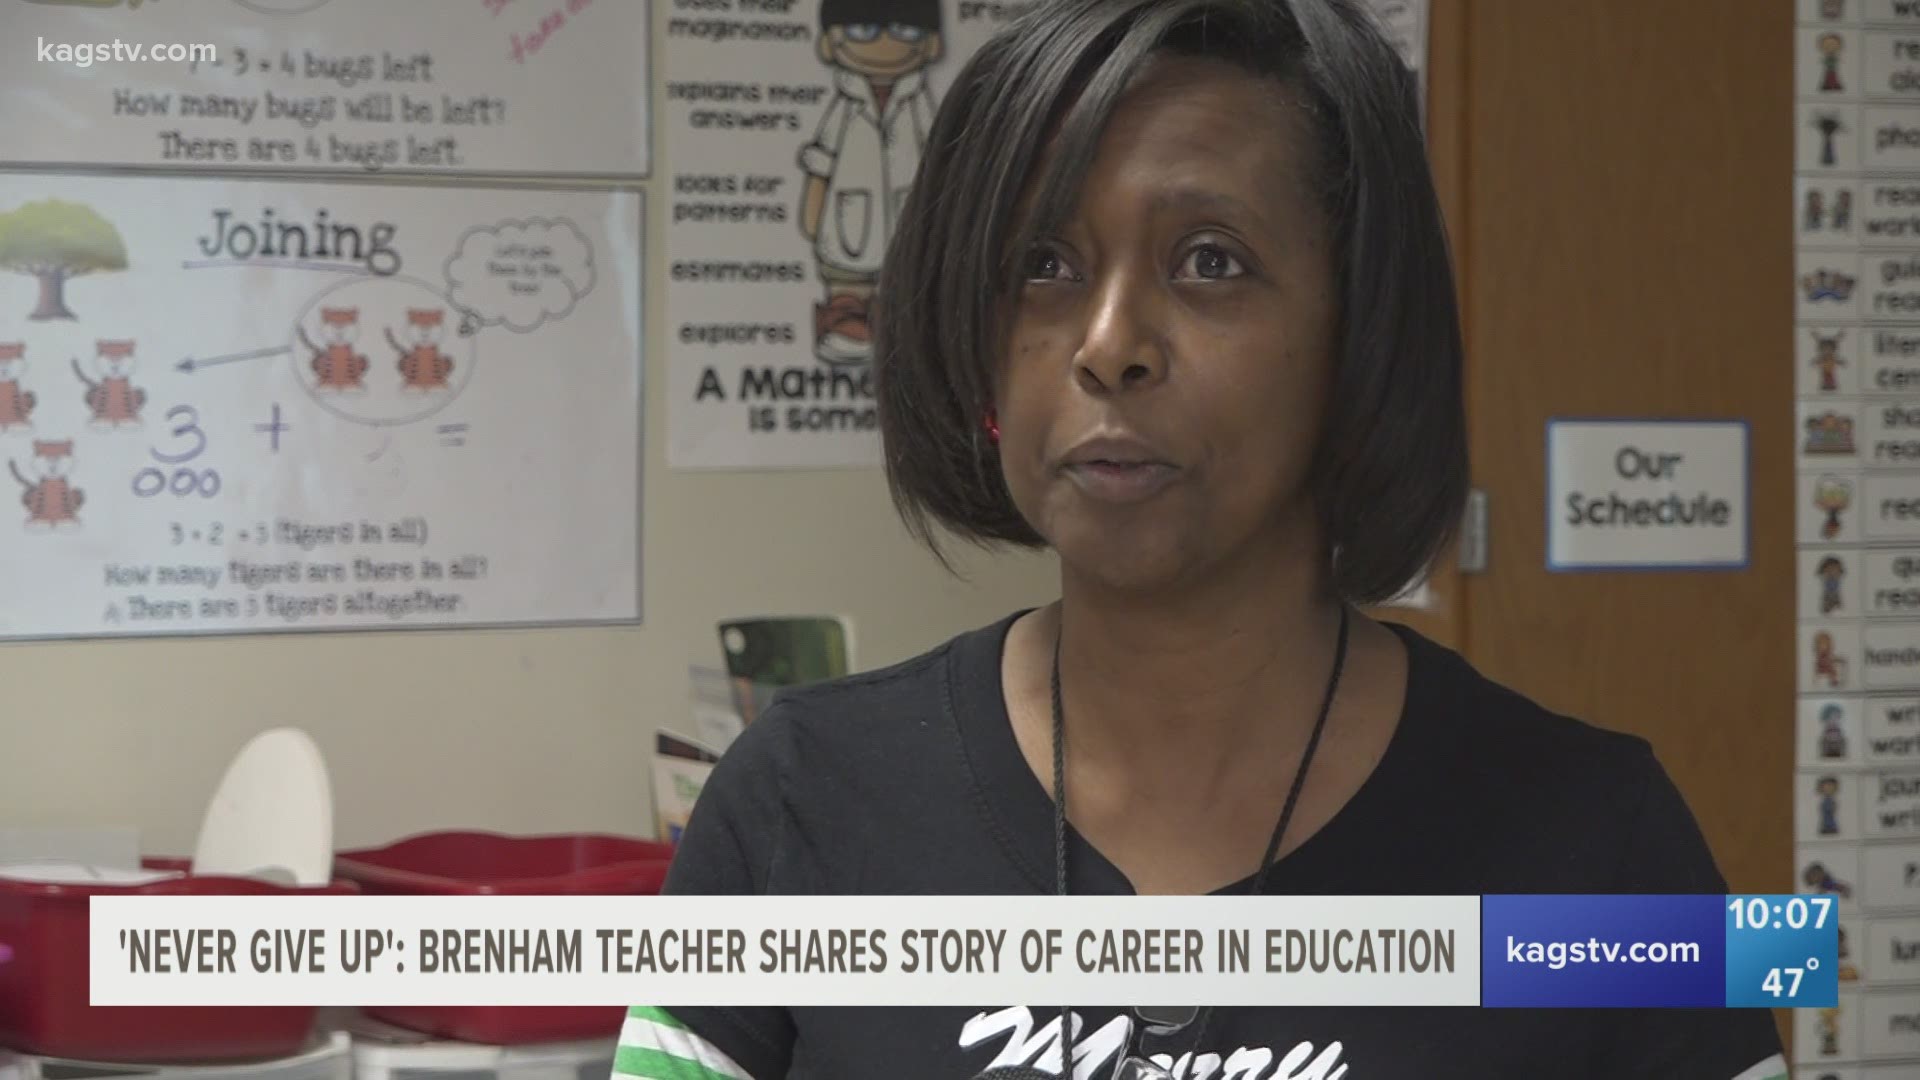 Brenham first-grade teacher Wanda Smith's journey to get into teaching wasn’t the easiest but it was worth it.